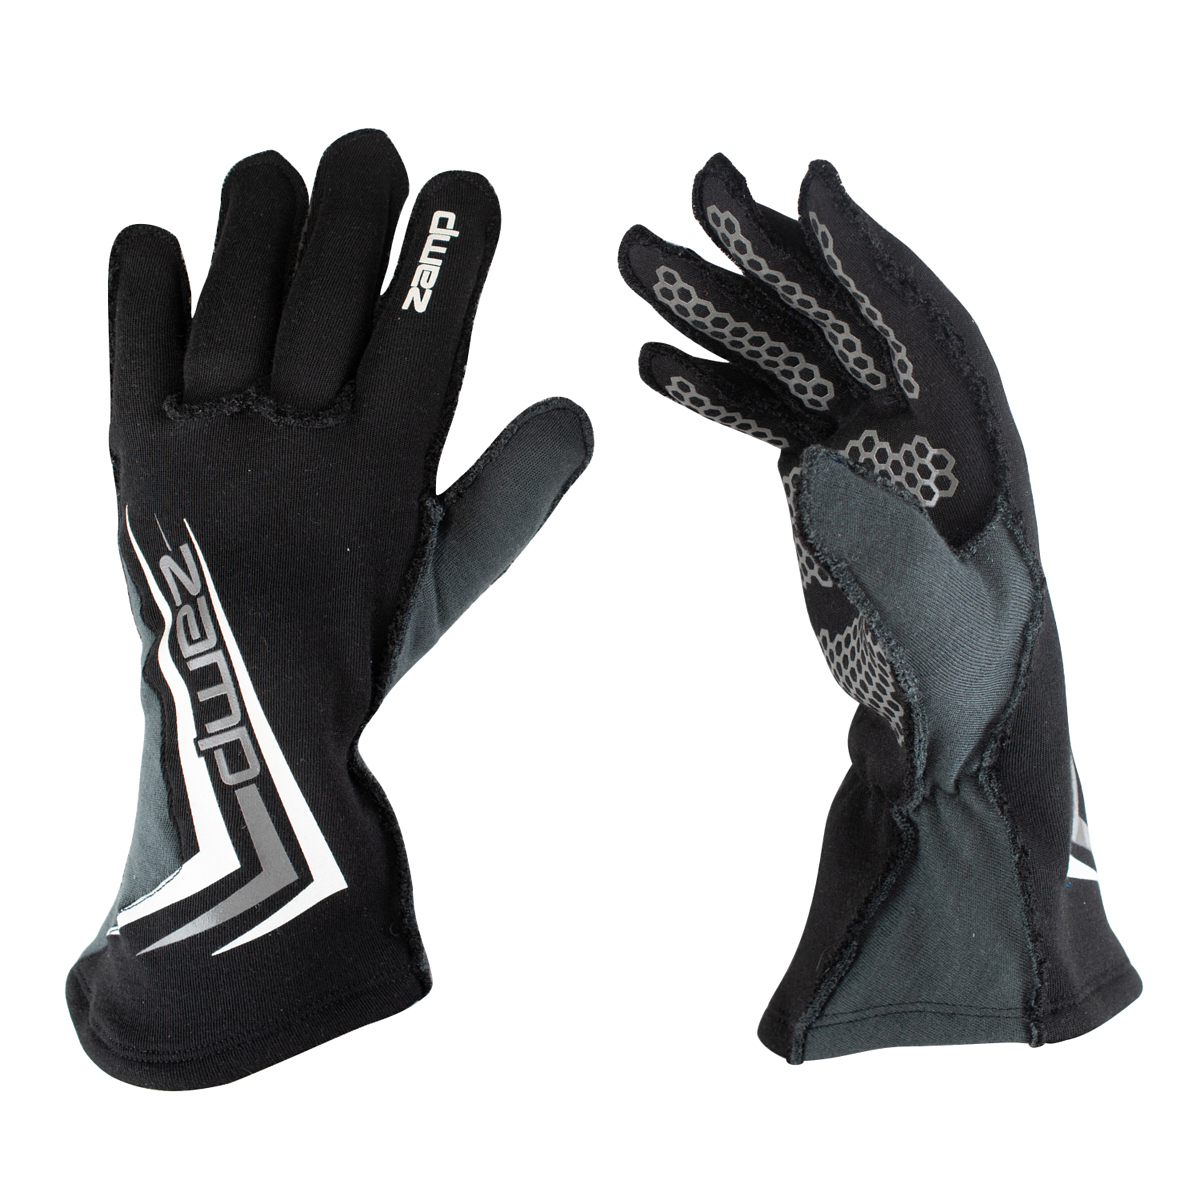 Zamp Racing RG20003S Driving Gloves, ZR-60, SFI 3.3/5, Double Layer, Fire Retardant Fabric, Silicone Palm, Black, Small, Pair